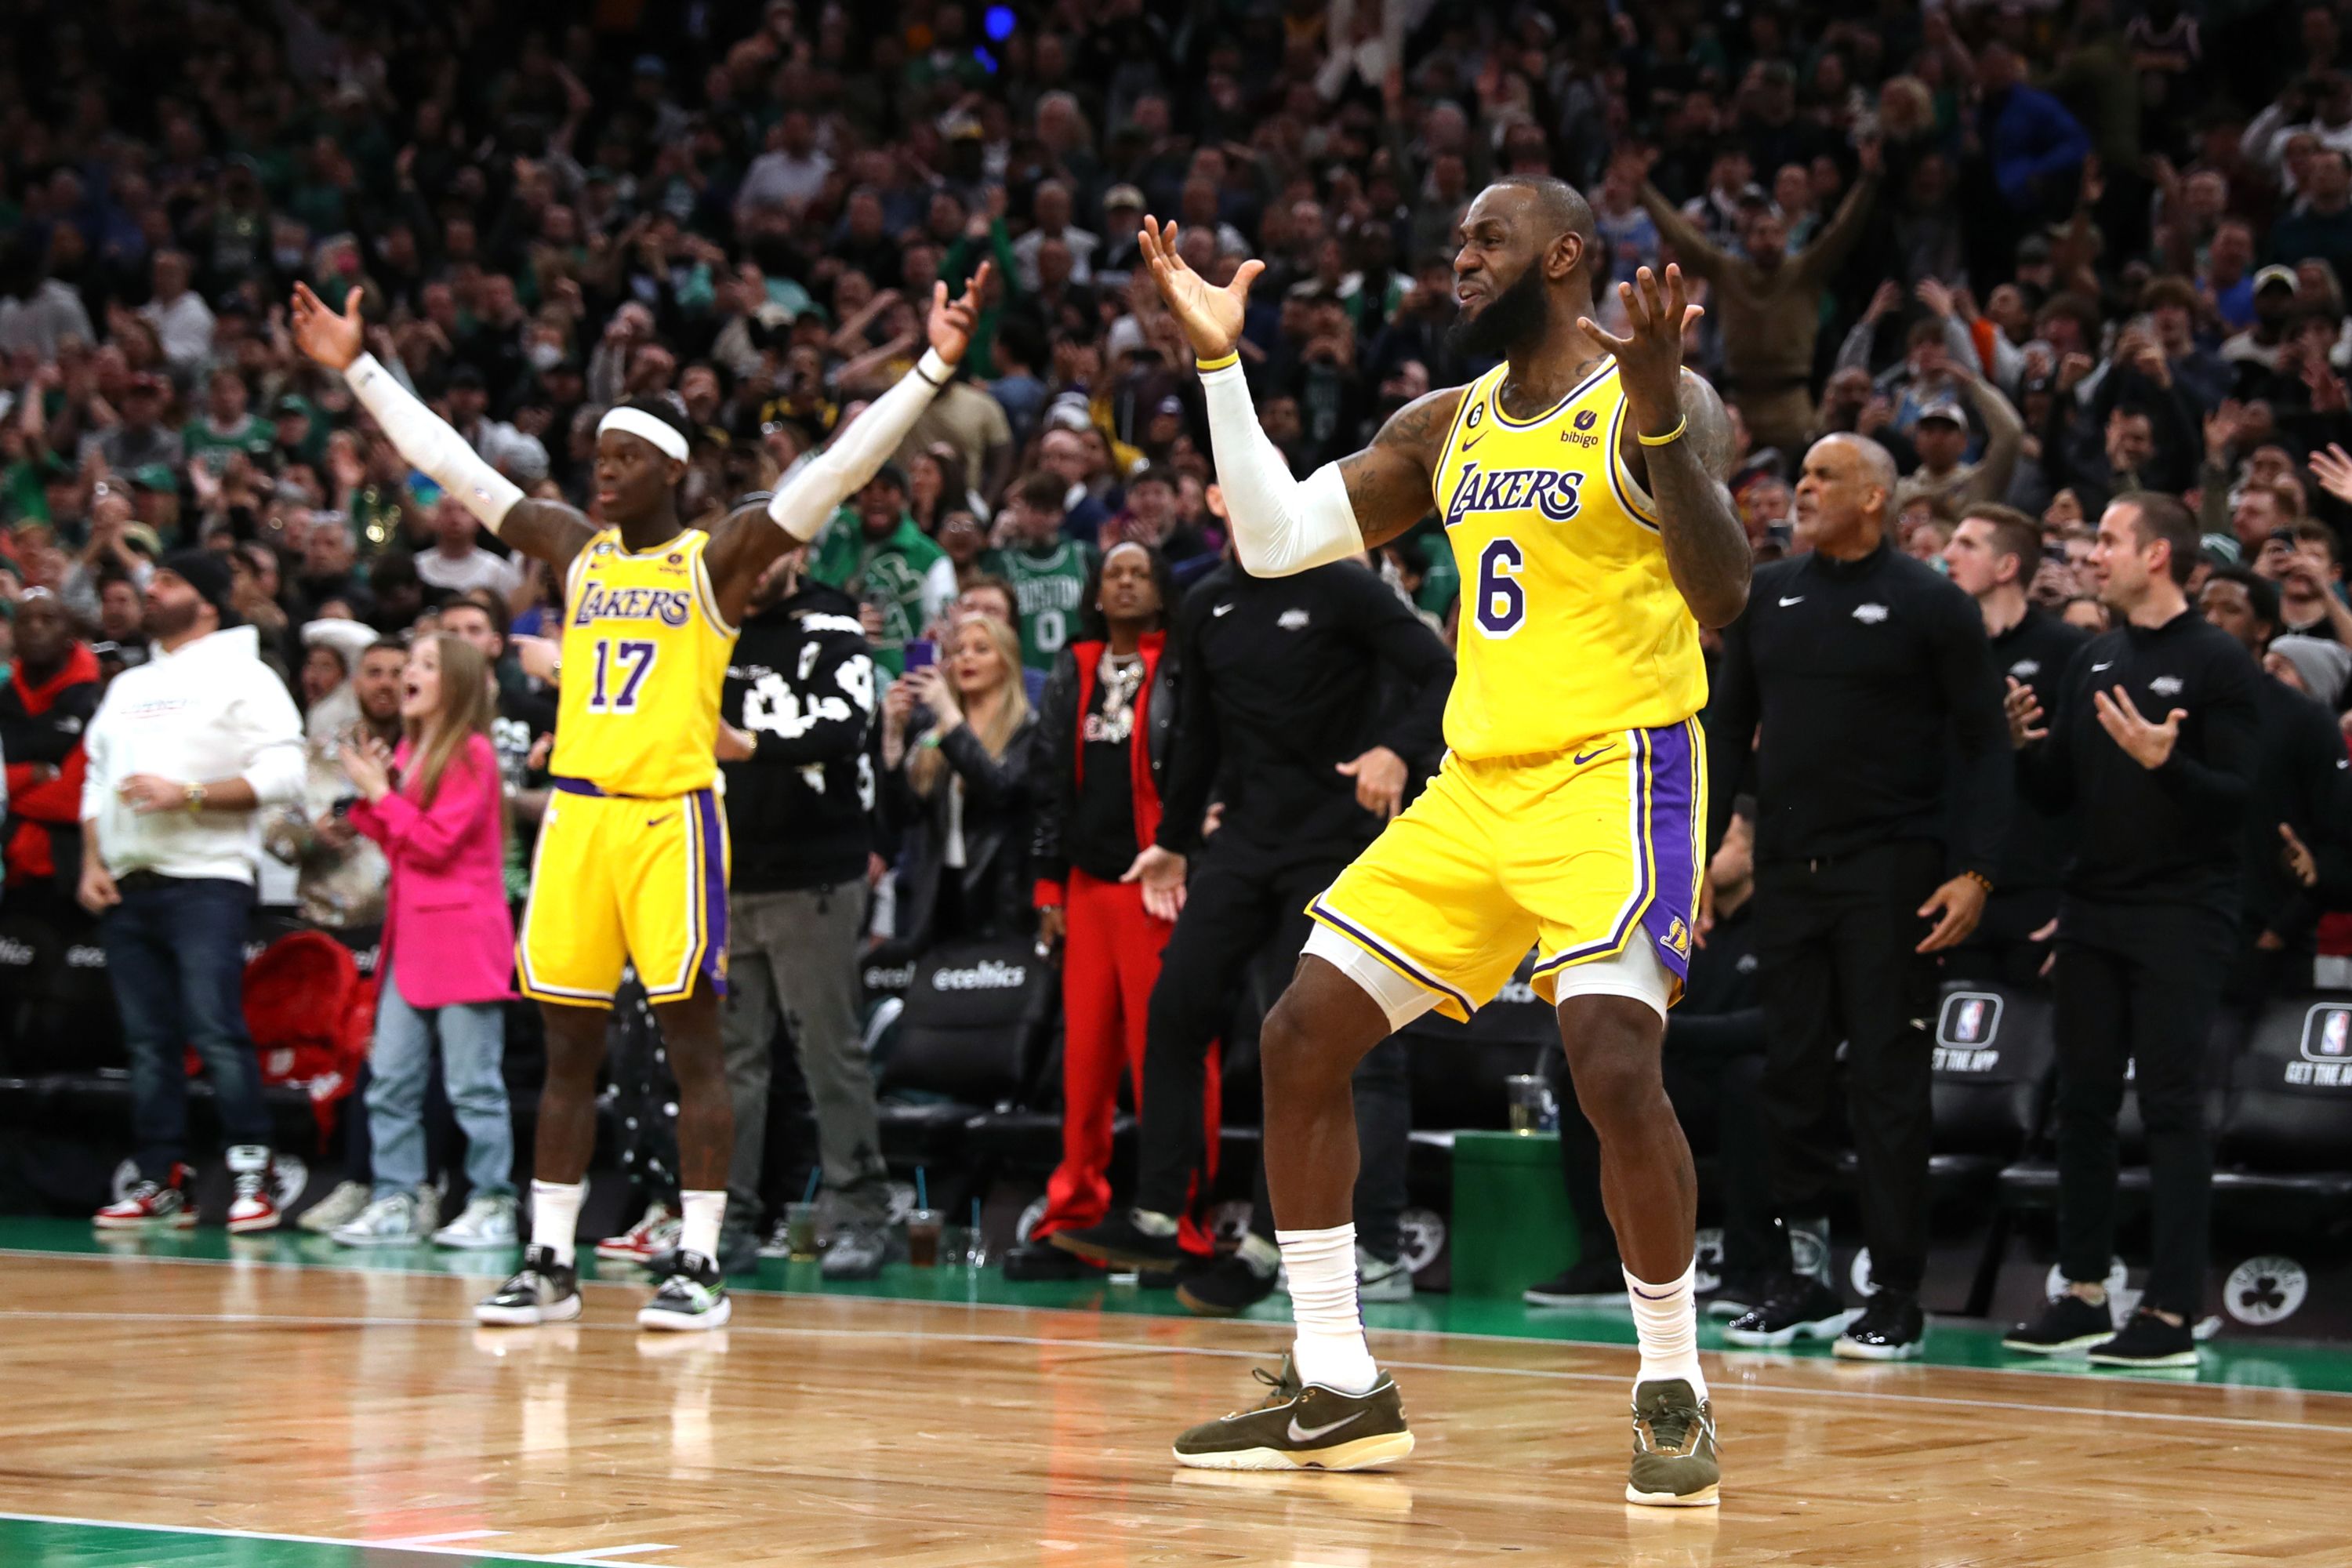 Lakers outlast Celtics in heated overtime affair